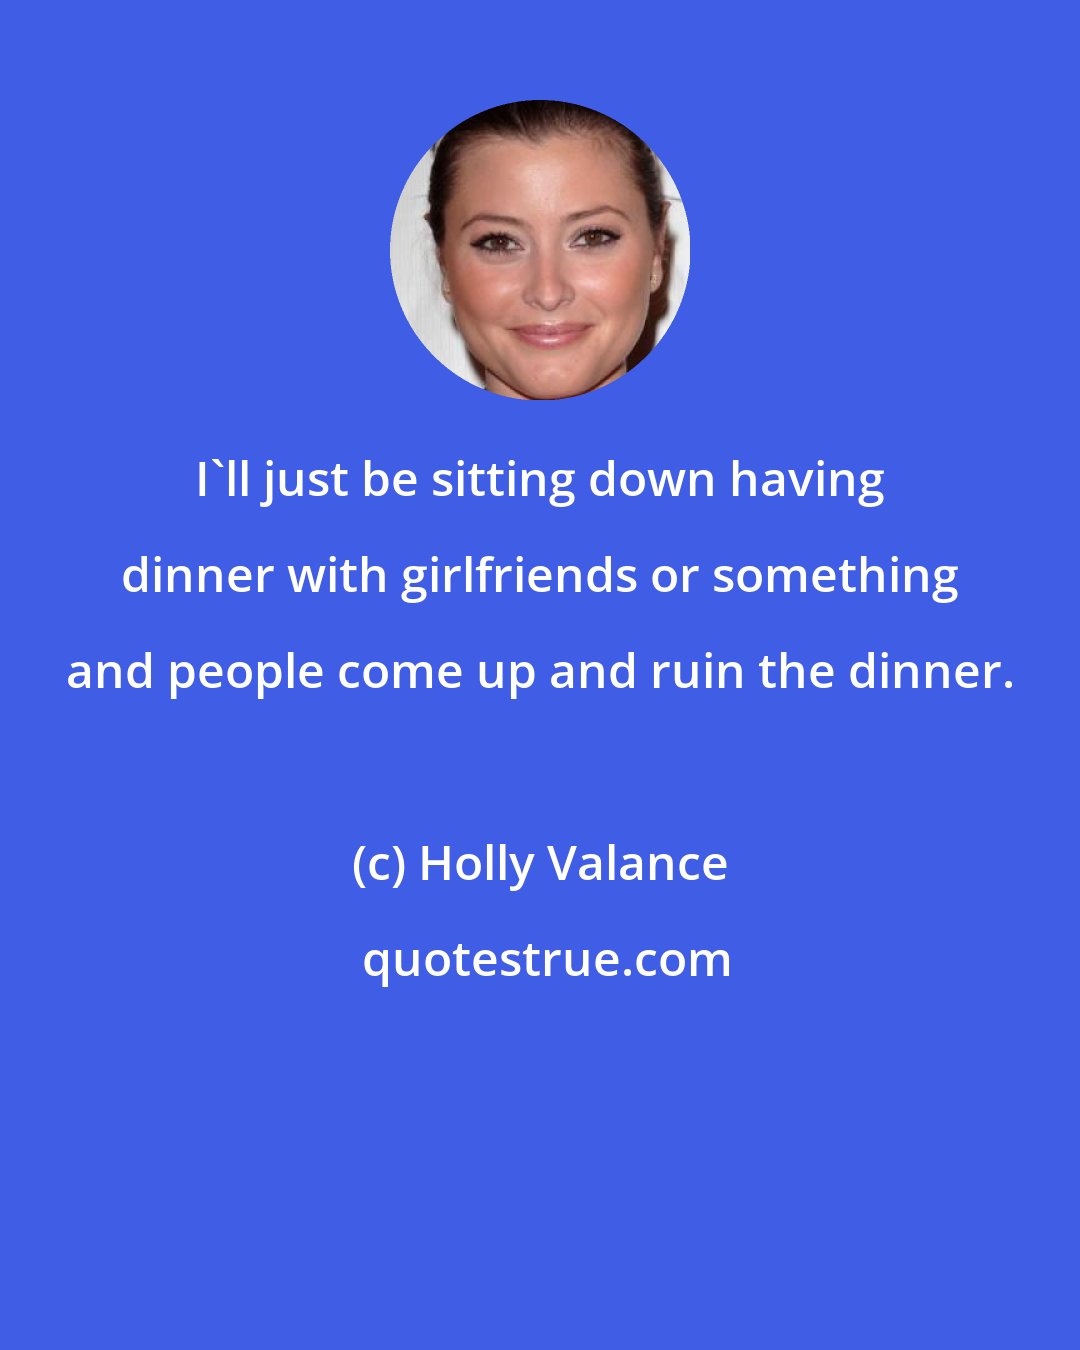 Holly Valance: I'll just be sitting down having dinner with girlfriends or something and people come up and ruin the dinner.